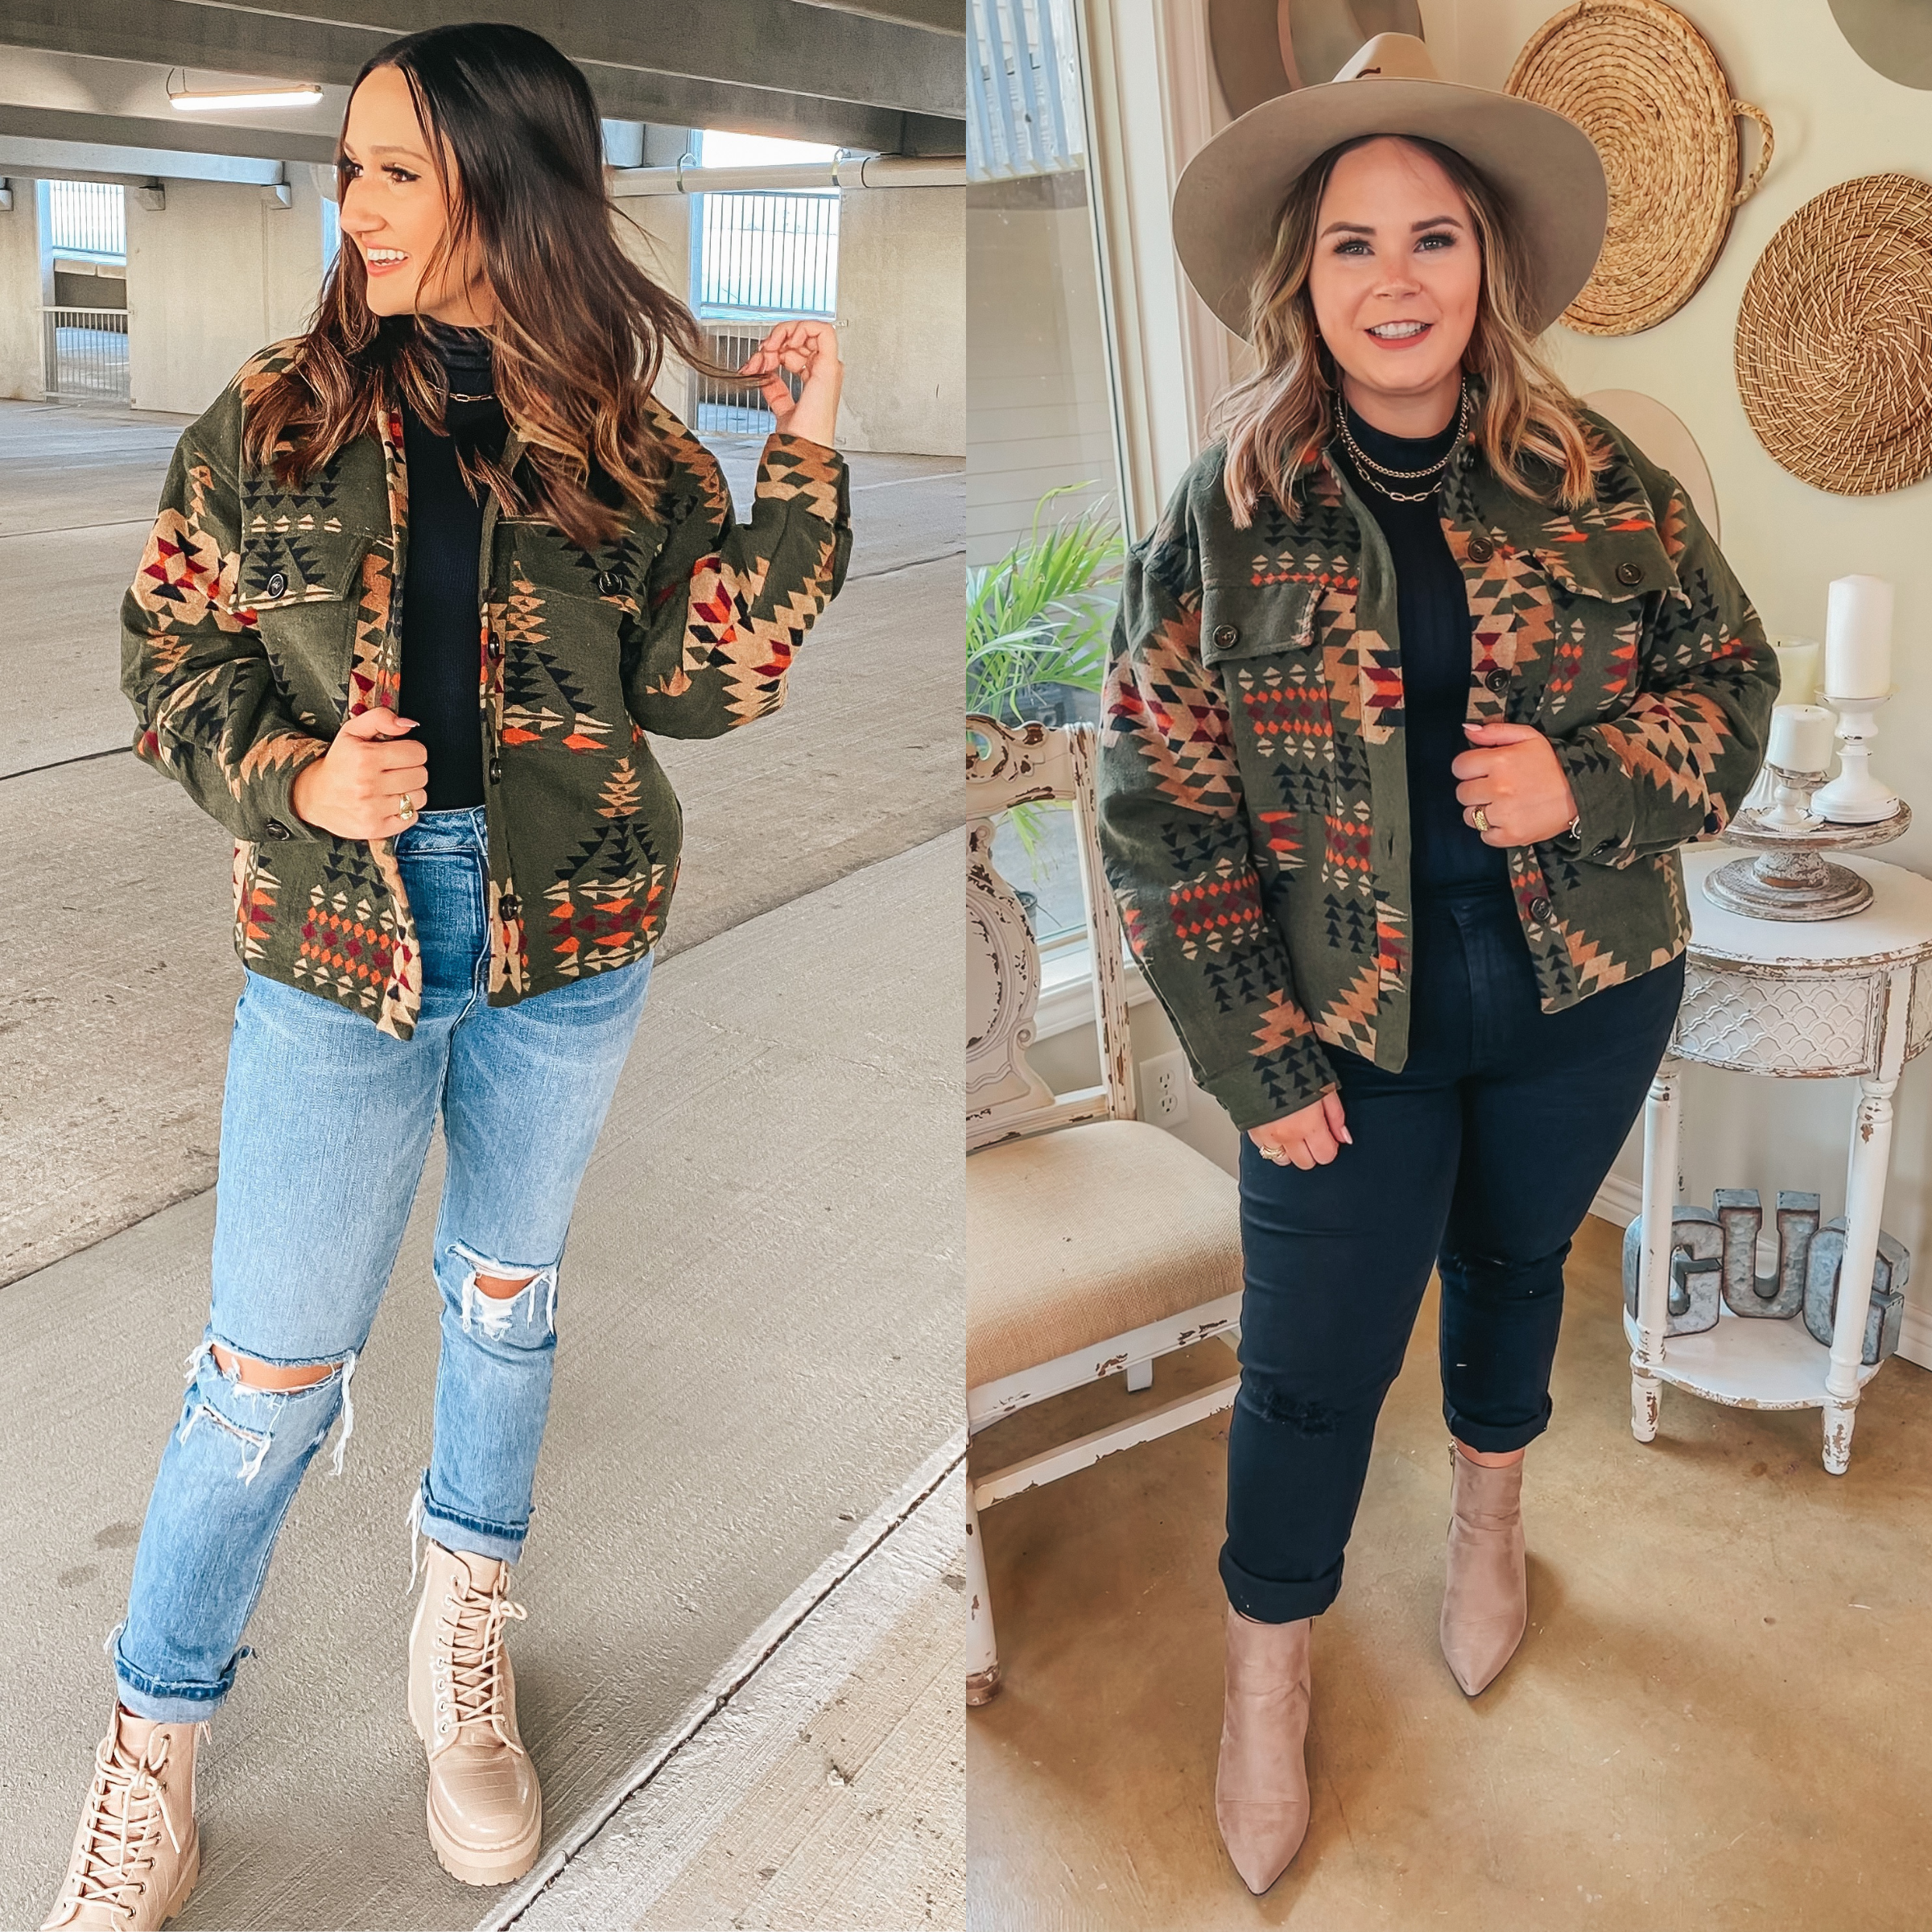 Models are wearing an olive jacket with an Aztec print. Size small model has it paired with nude combat boots, boyfriend jeans, a black tank top, and gold jewelry. Size large model has it paired with taupe booties, black skinny jeans, a black tank top, and tan hat.